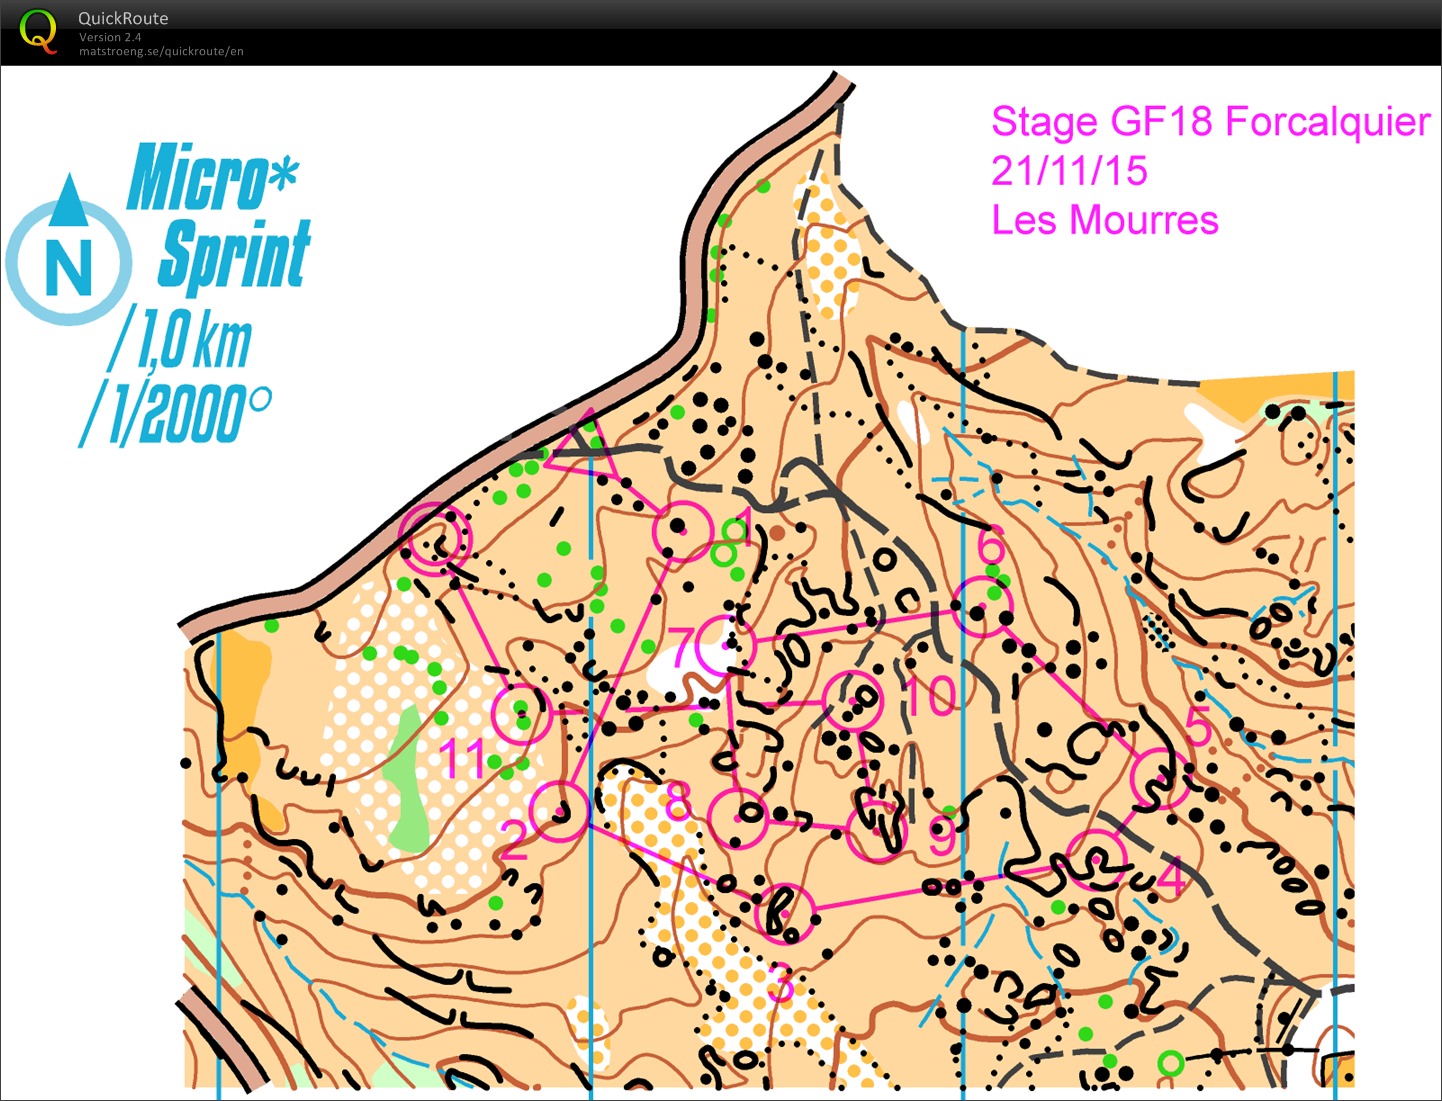 Stage gf-18 Forcalquier // microSprint (2015-11-21)